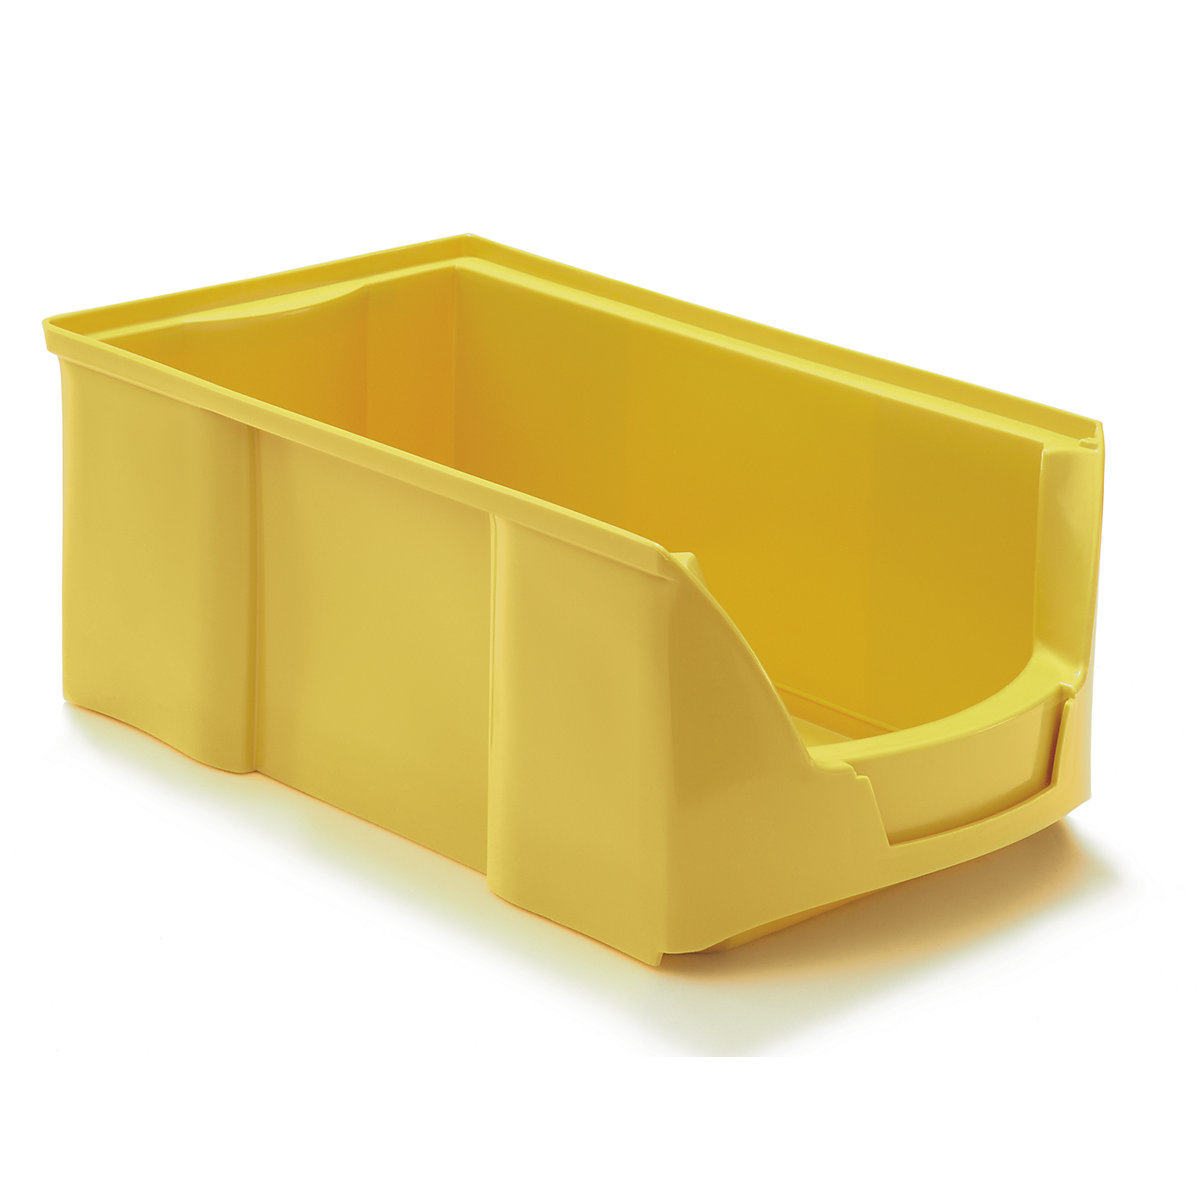 FUTURA open fronted storage bin made of polyethylene, LxWxH 360 x 208 x 147 mm, pack of 12, yellow-17